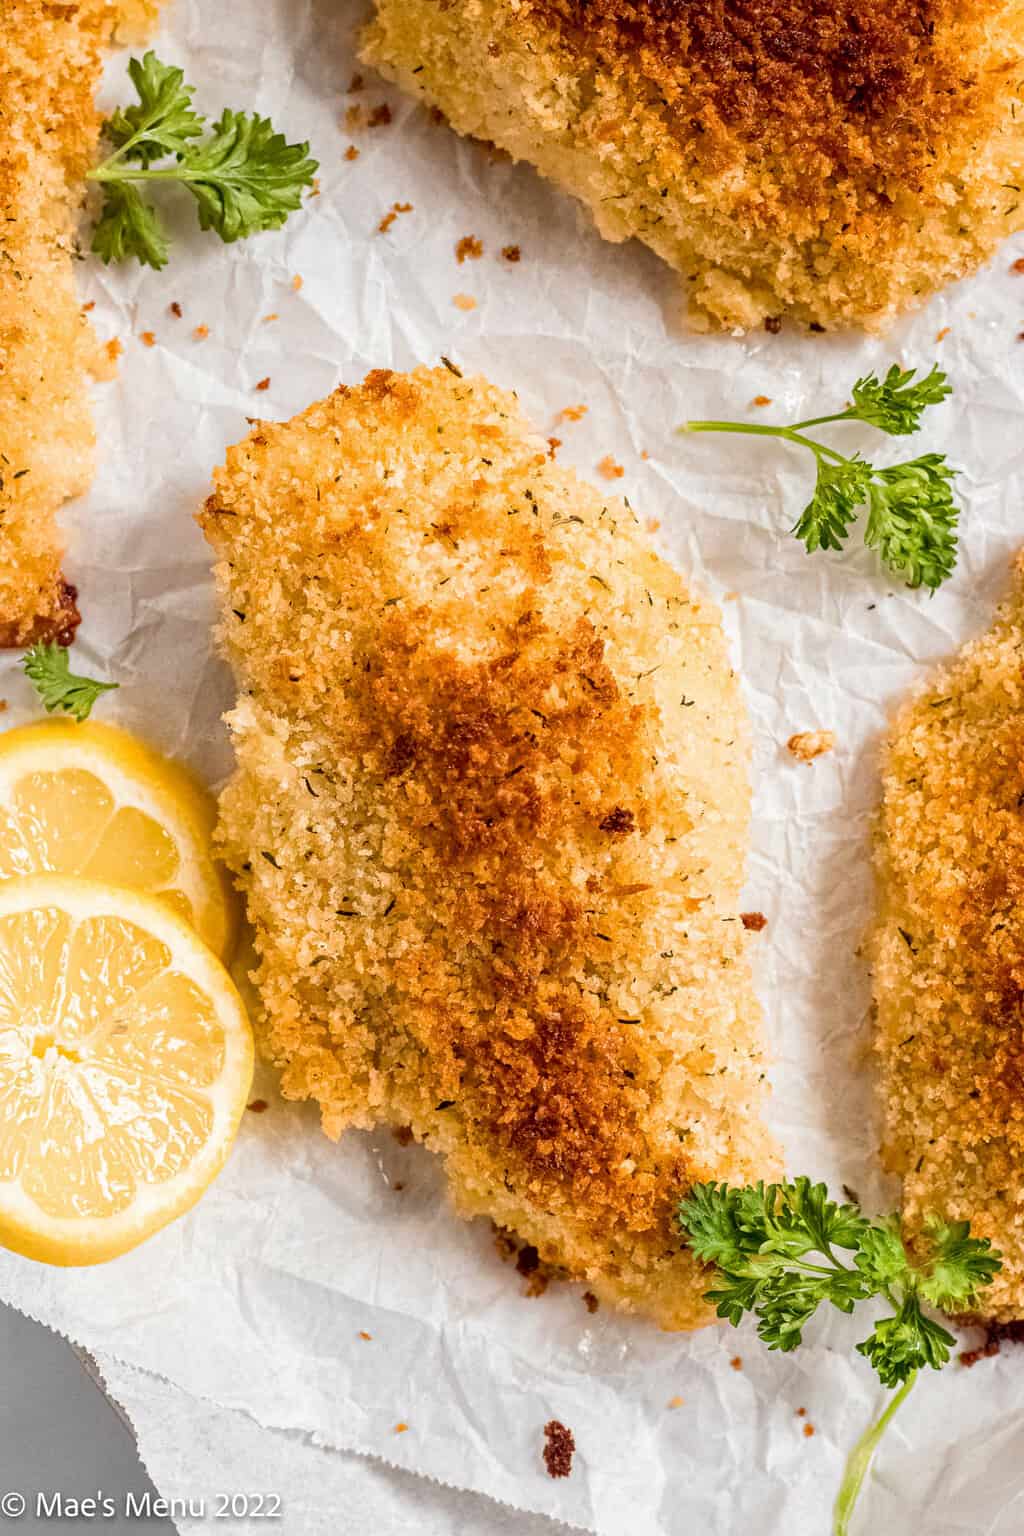 An up-close overhead shot of a panko crusted chicken breast on a baking sheet with parlsey and lemon.